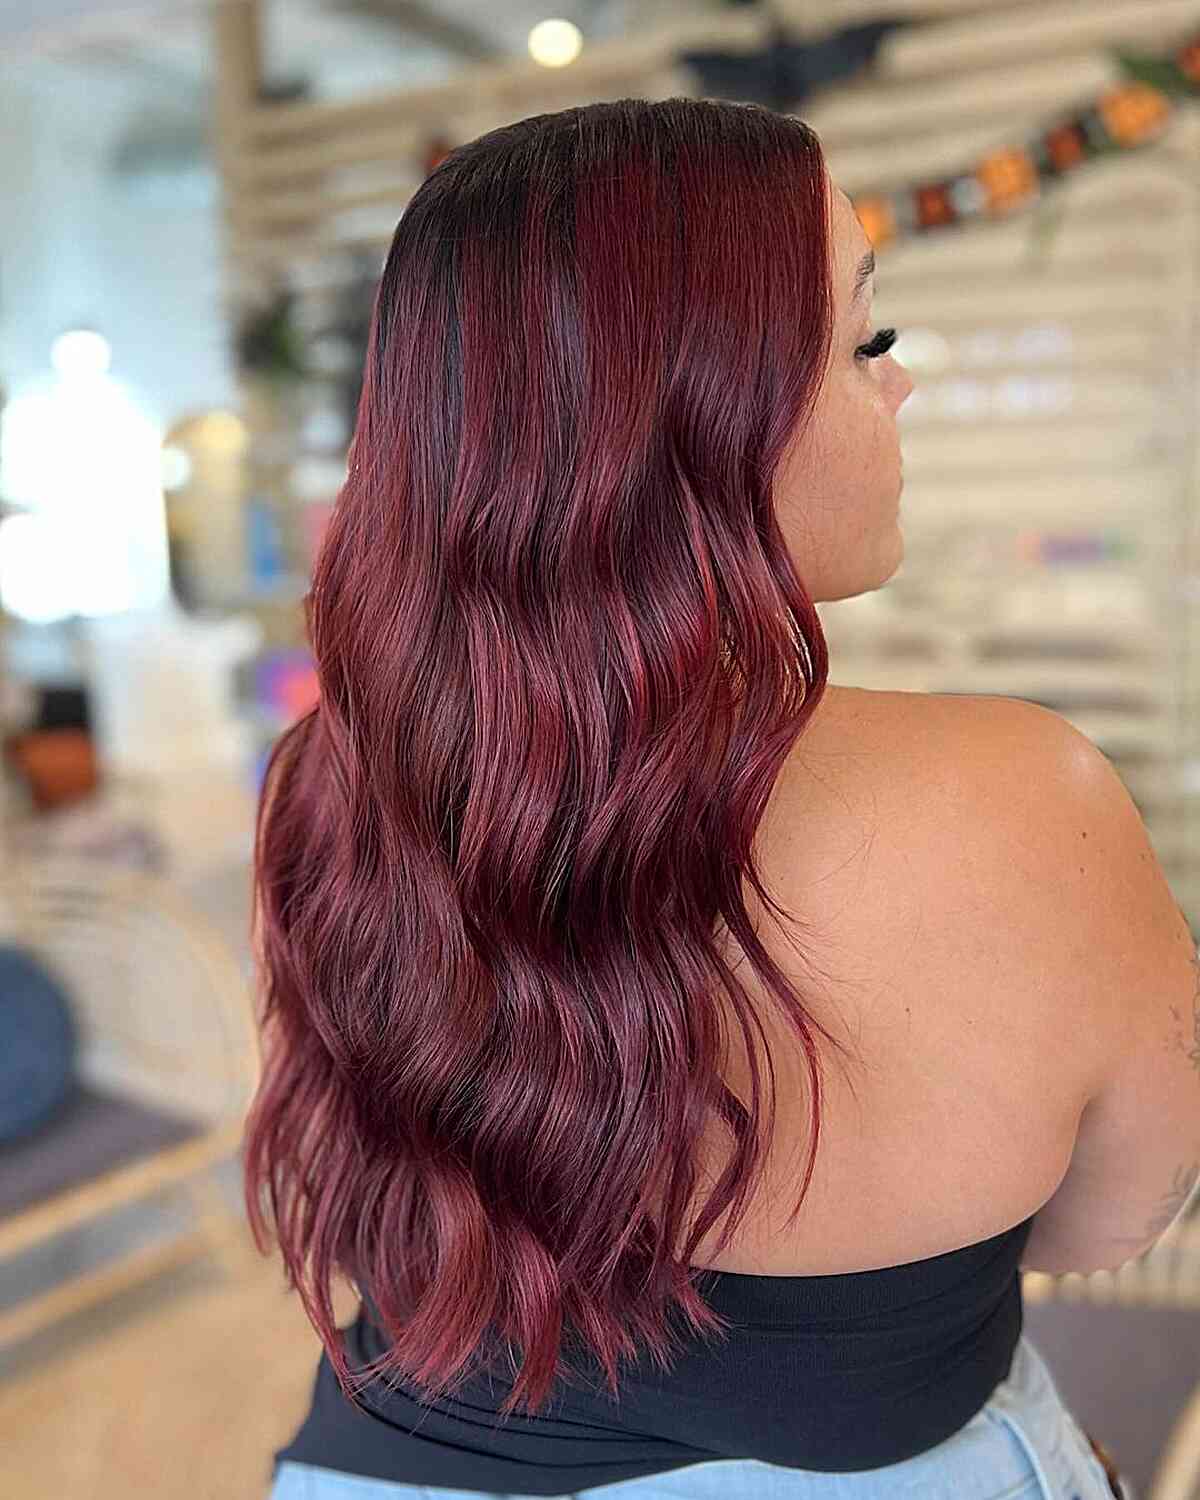 Longer Locks with Rich Cherry Cola Color and Dark Roots